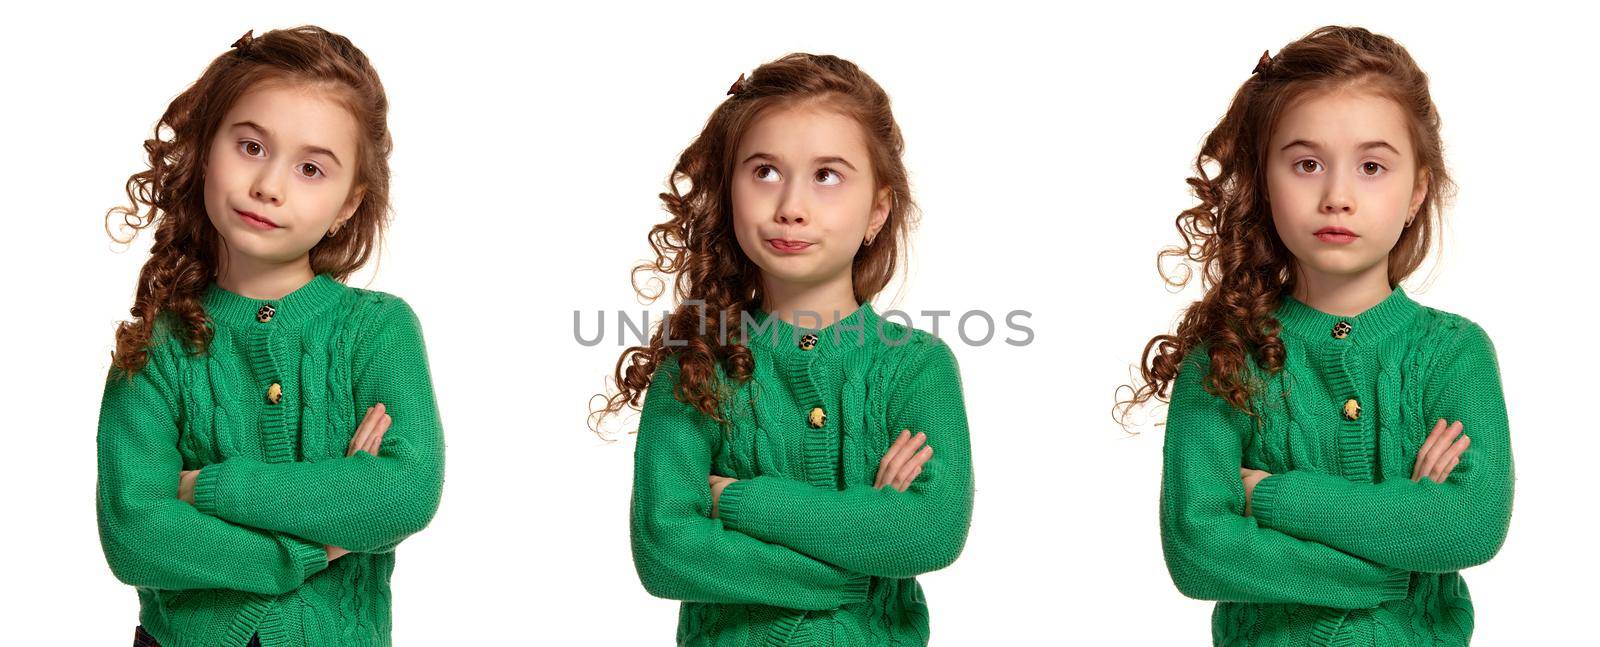 Portrait of a beautiful little girl in a green knitted sweater posing isolated on white background. by nazarovsergey